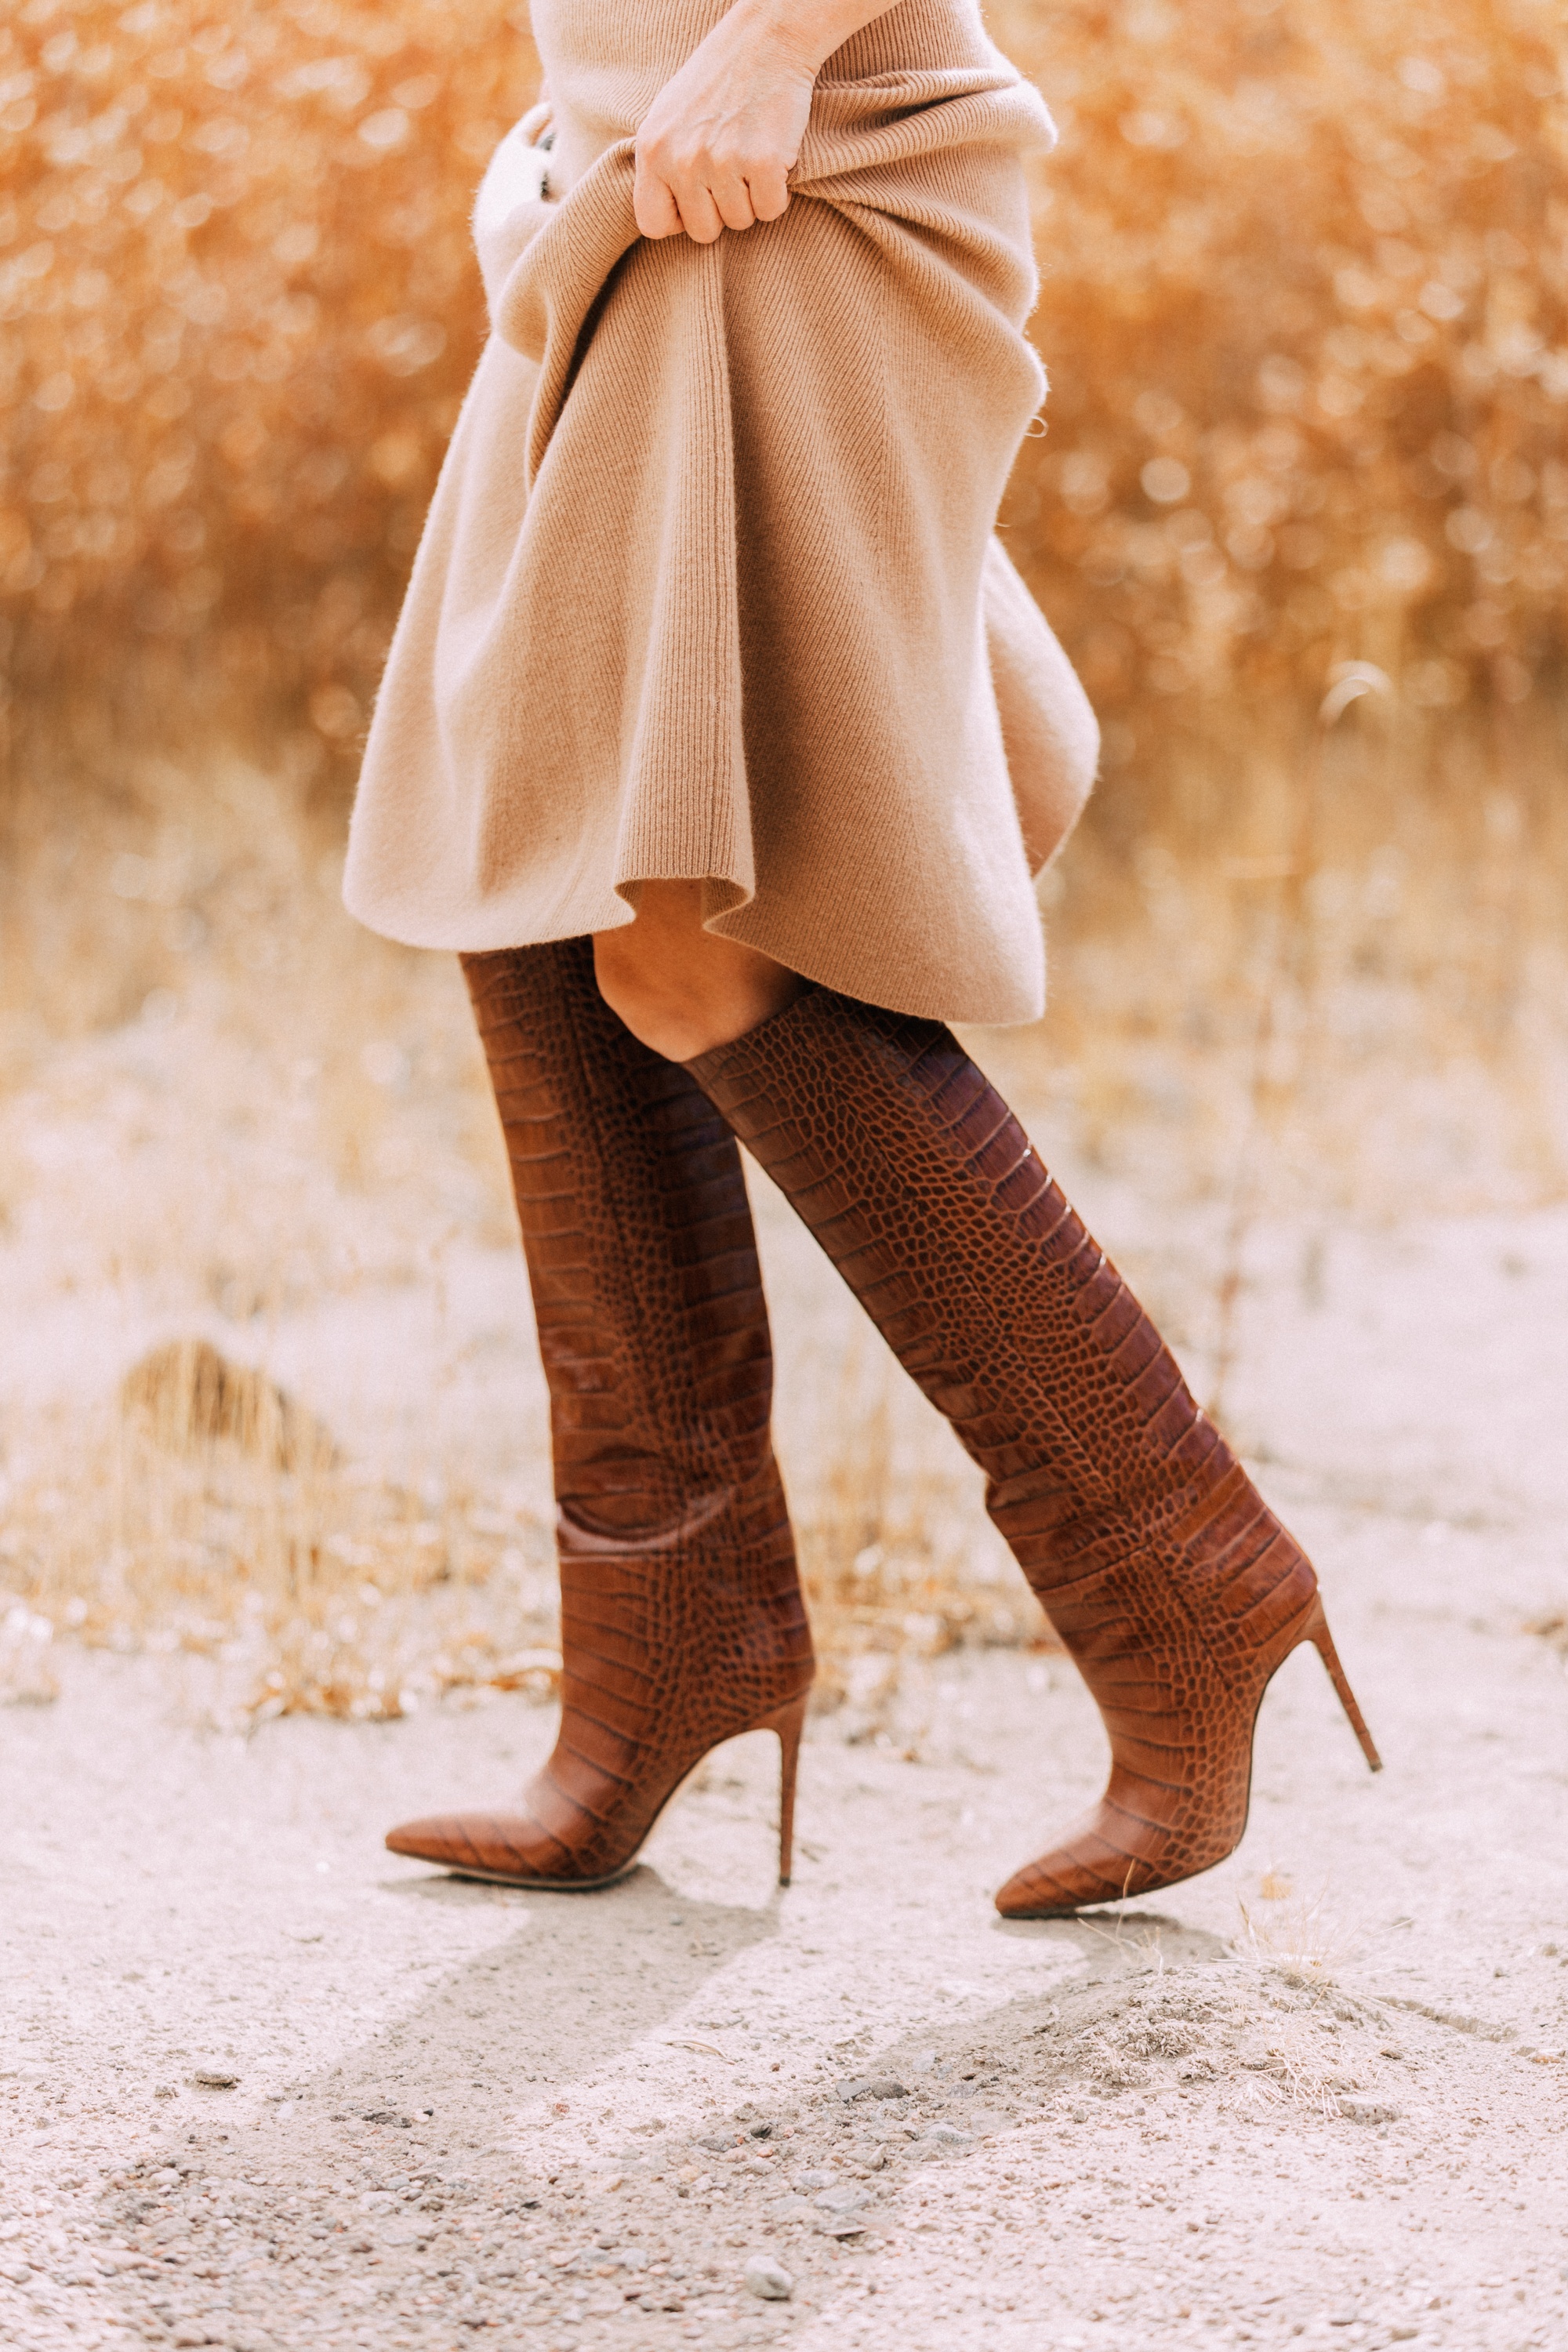 paris texas crocodile embossed leather knee high stilettos boots with camel sweater dress